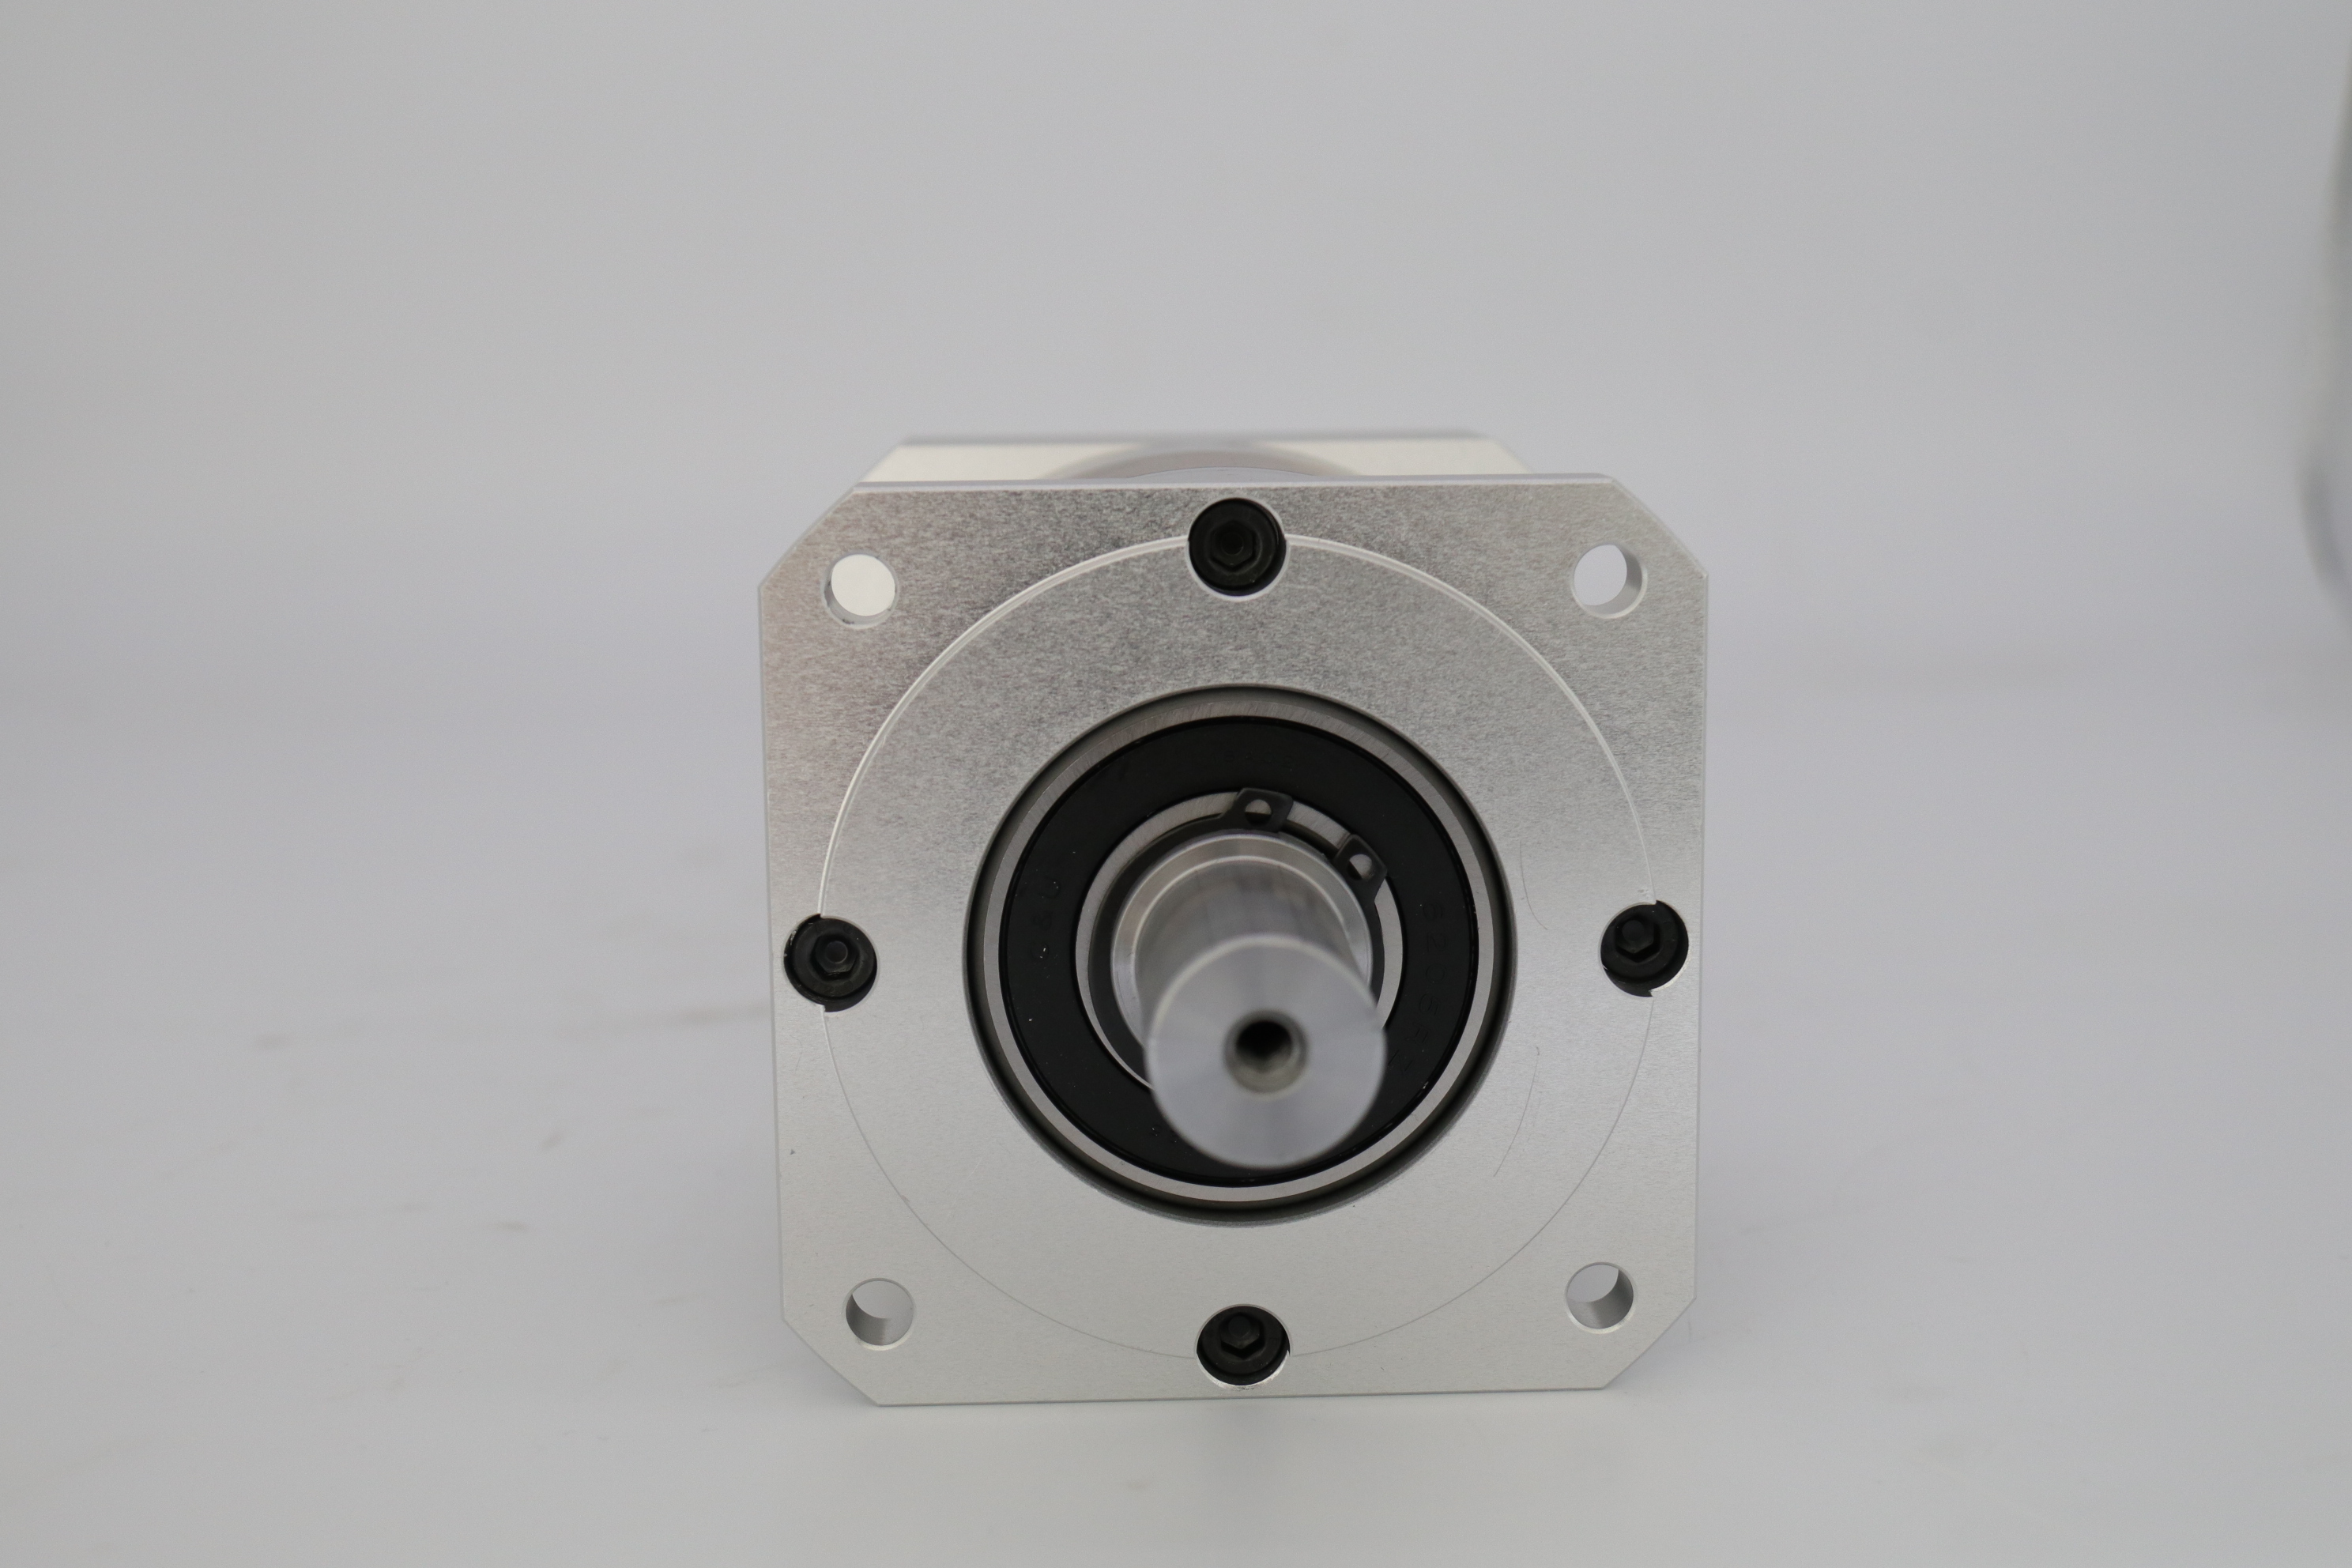 NEMA24 Two Stage Planetary Reducer Reduction Ratio L2/9.12.15.20.25.30.40.50.70 Rated Input Speed:4000rpm Transmission Efficiency 90%